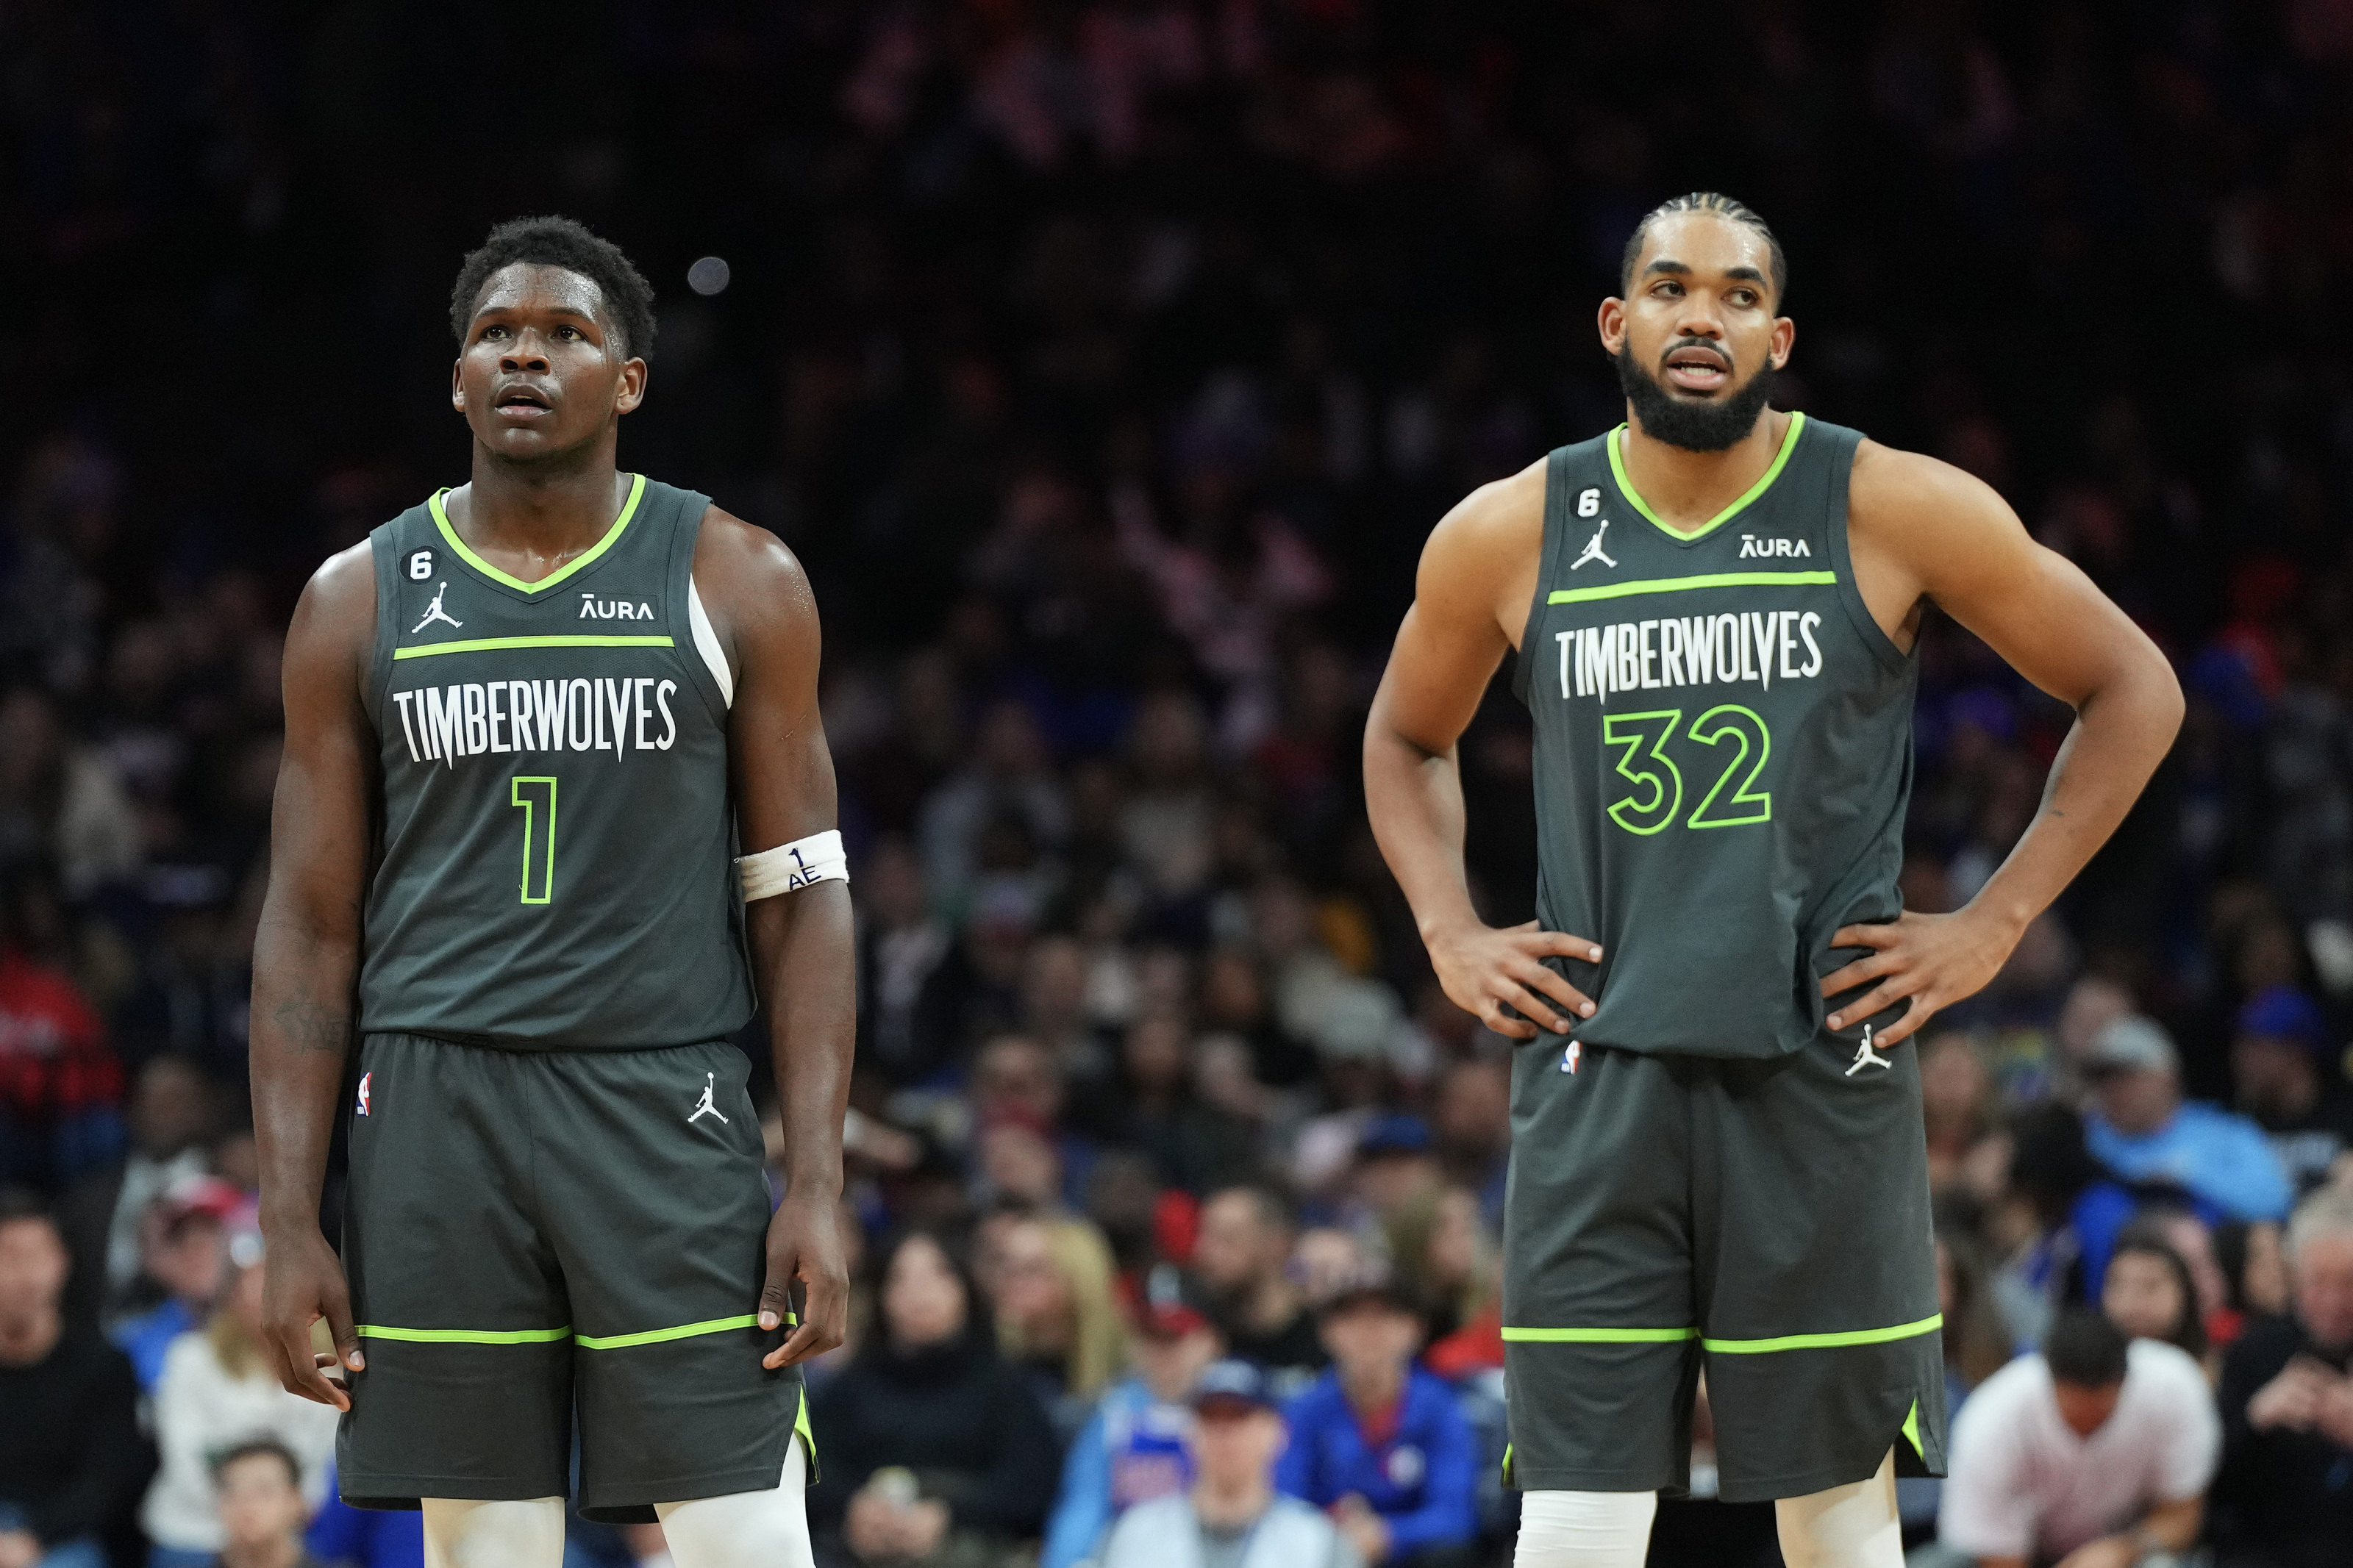 Timberwolves were where Naz Reid wanted to be all along, even if